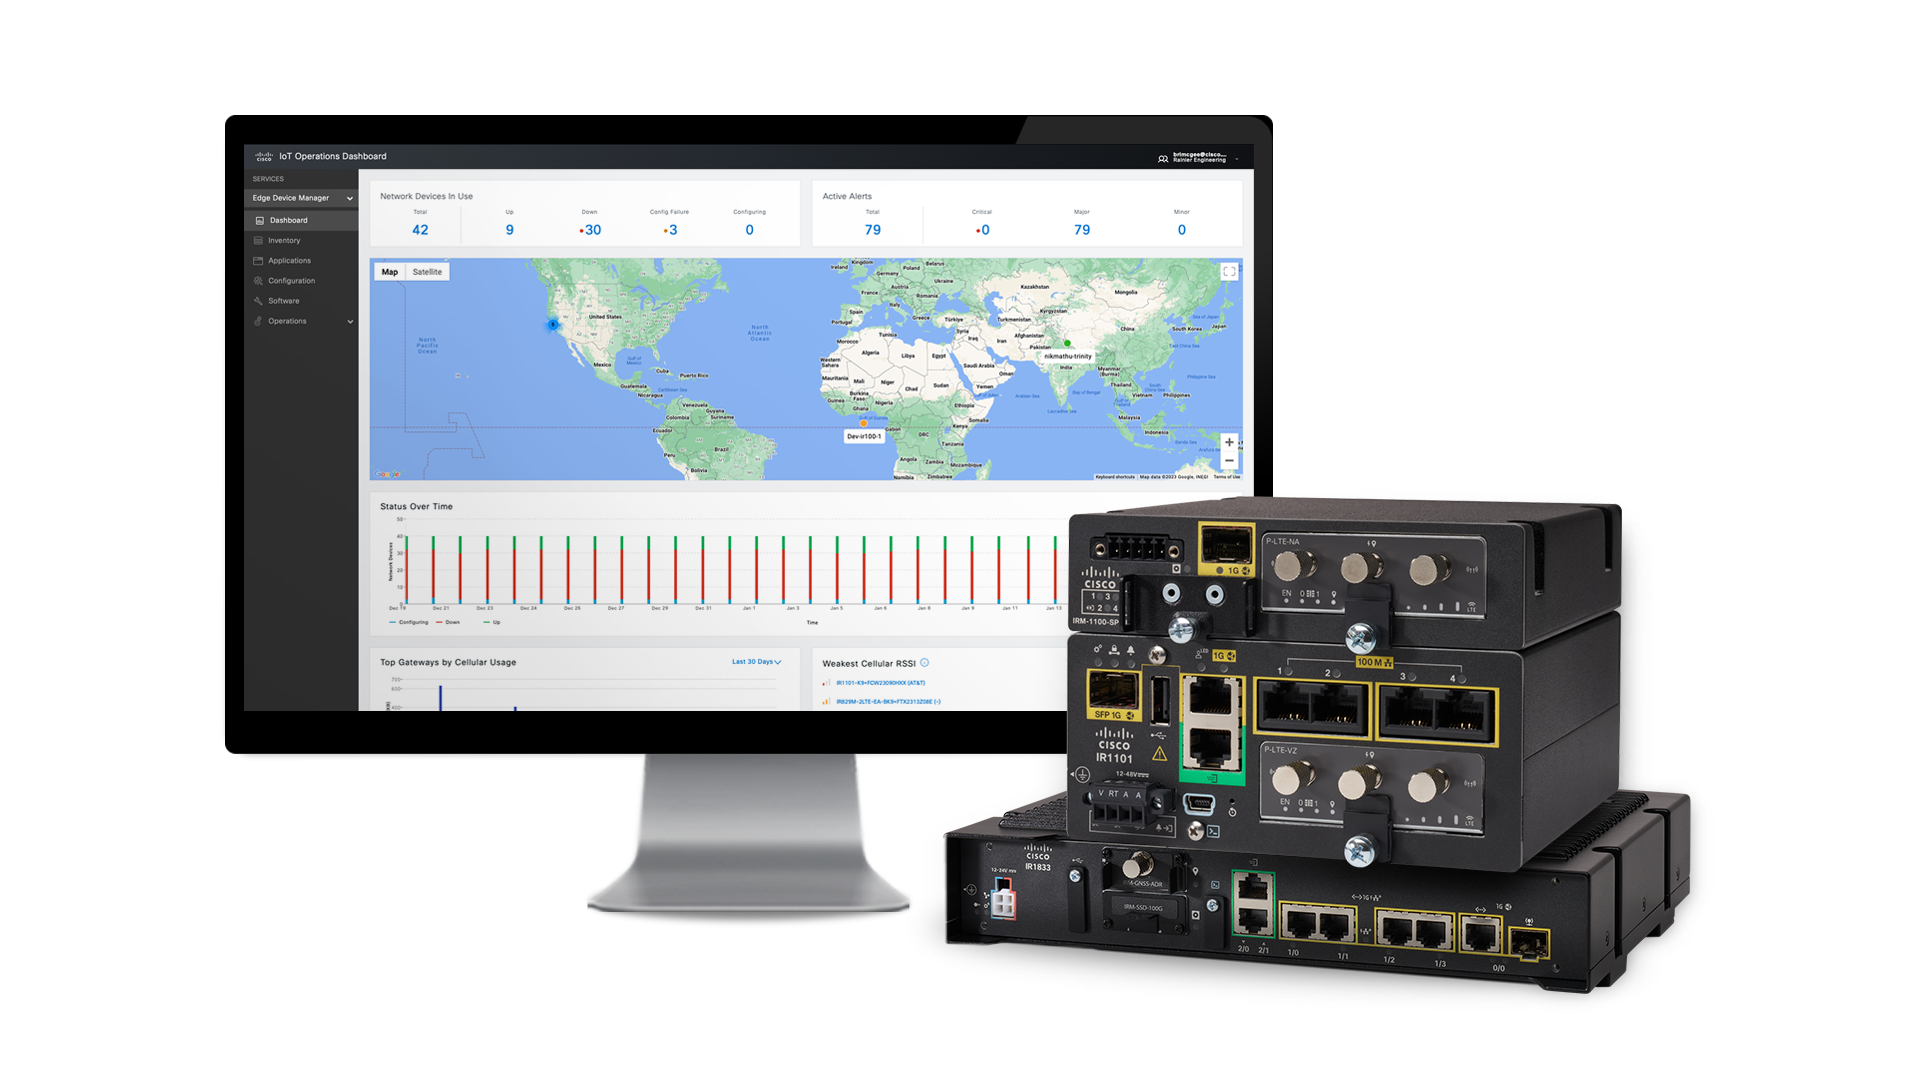 IoT operations dashboard and Cisco rugged series routers